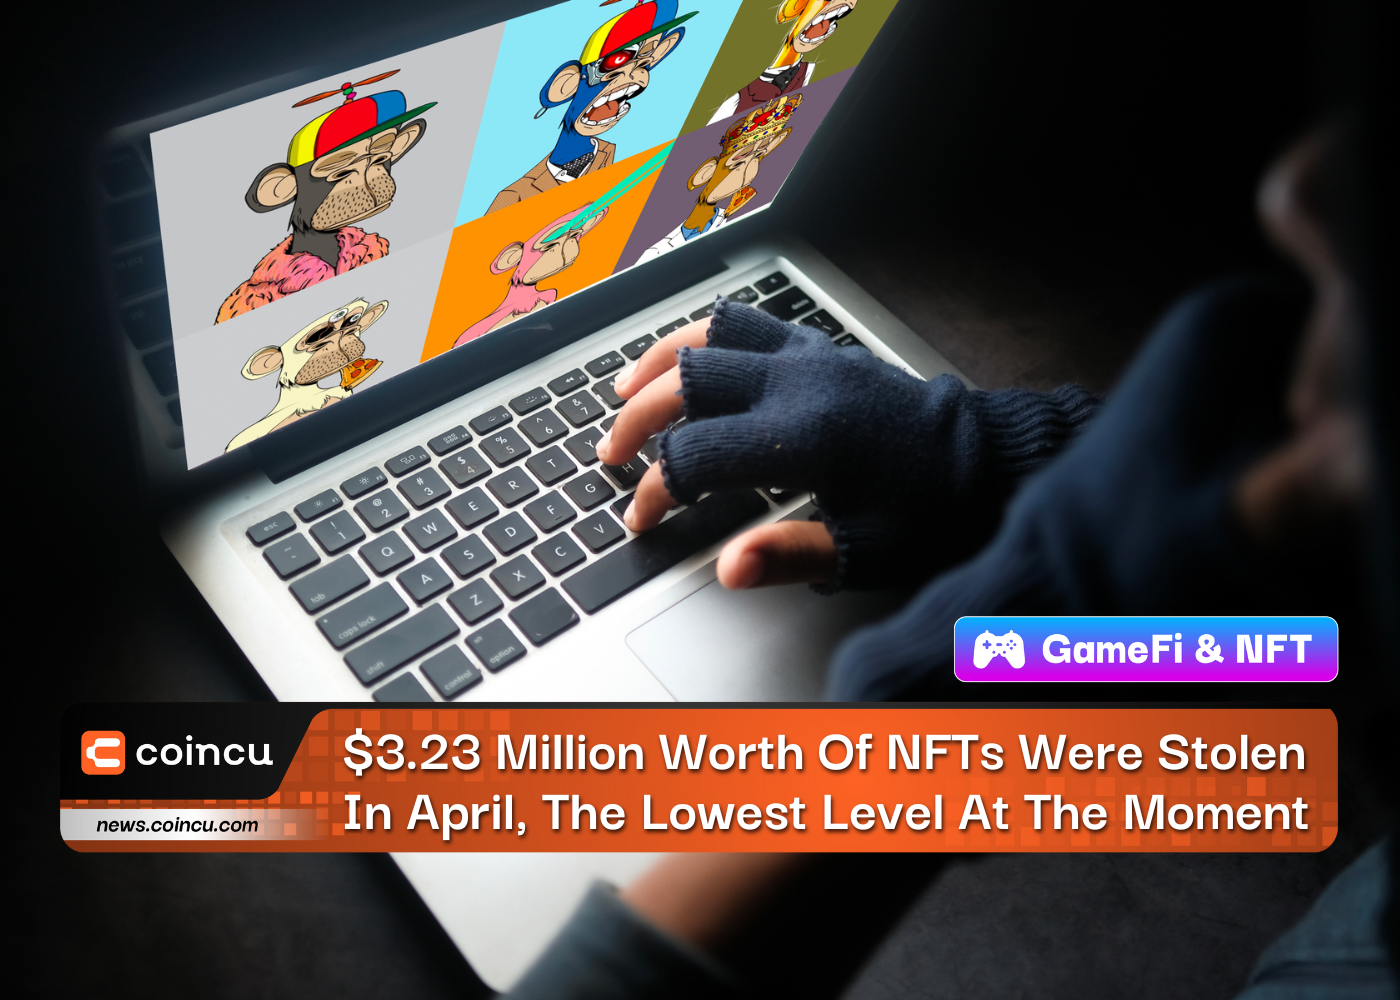 $3.23 Million Worth Of NFTs Were Stolen In April, The Lowest Level At The Moment